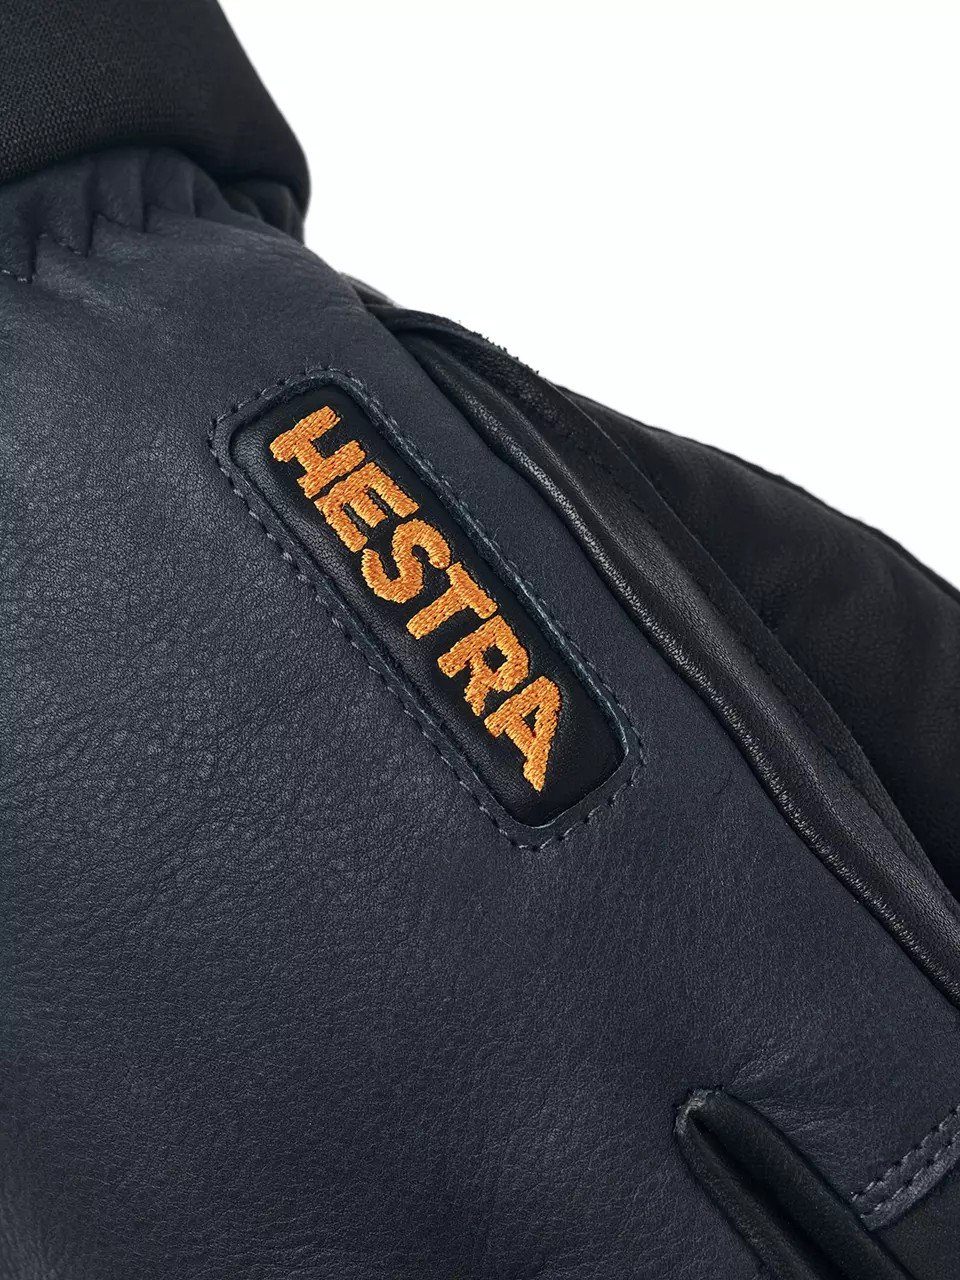 Hestra finger 5 leather wool - Army terry Multisporthandschuhe